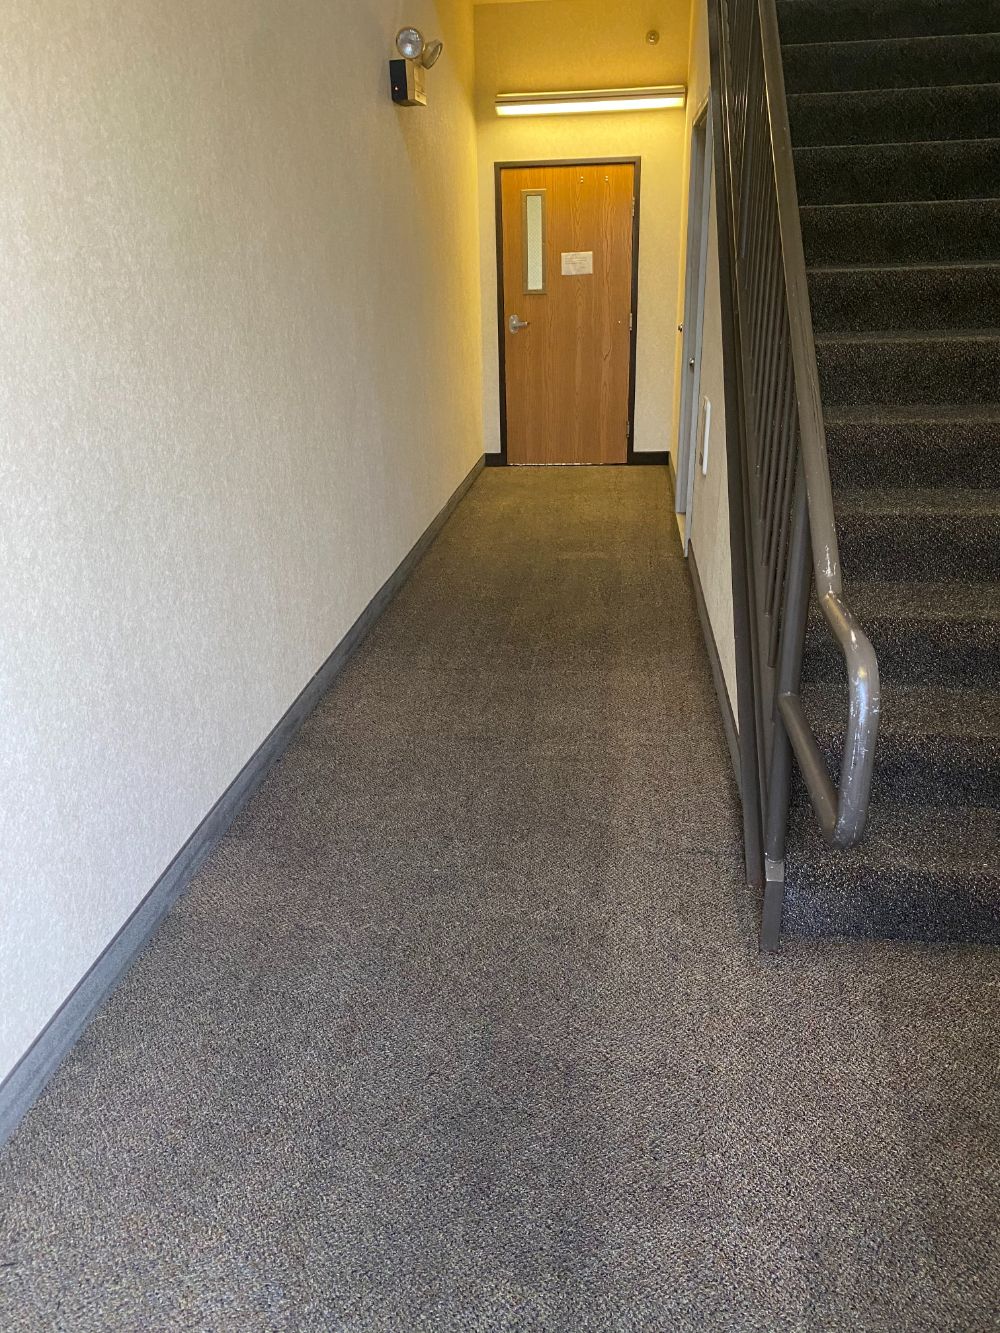 Hotel carpet cleaning pittsburgh pa tampa fl